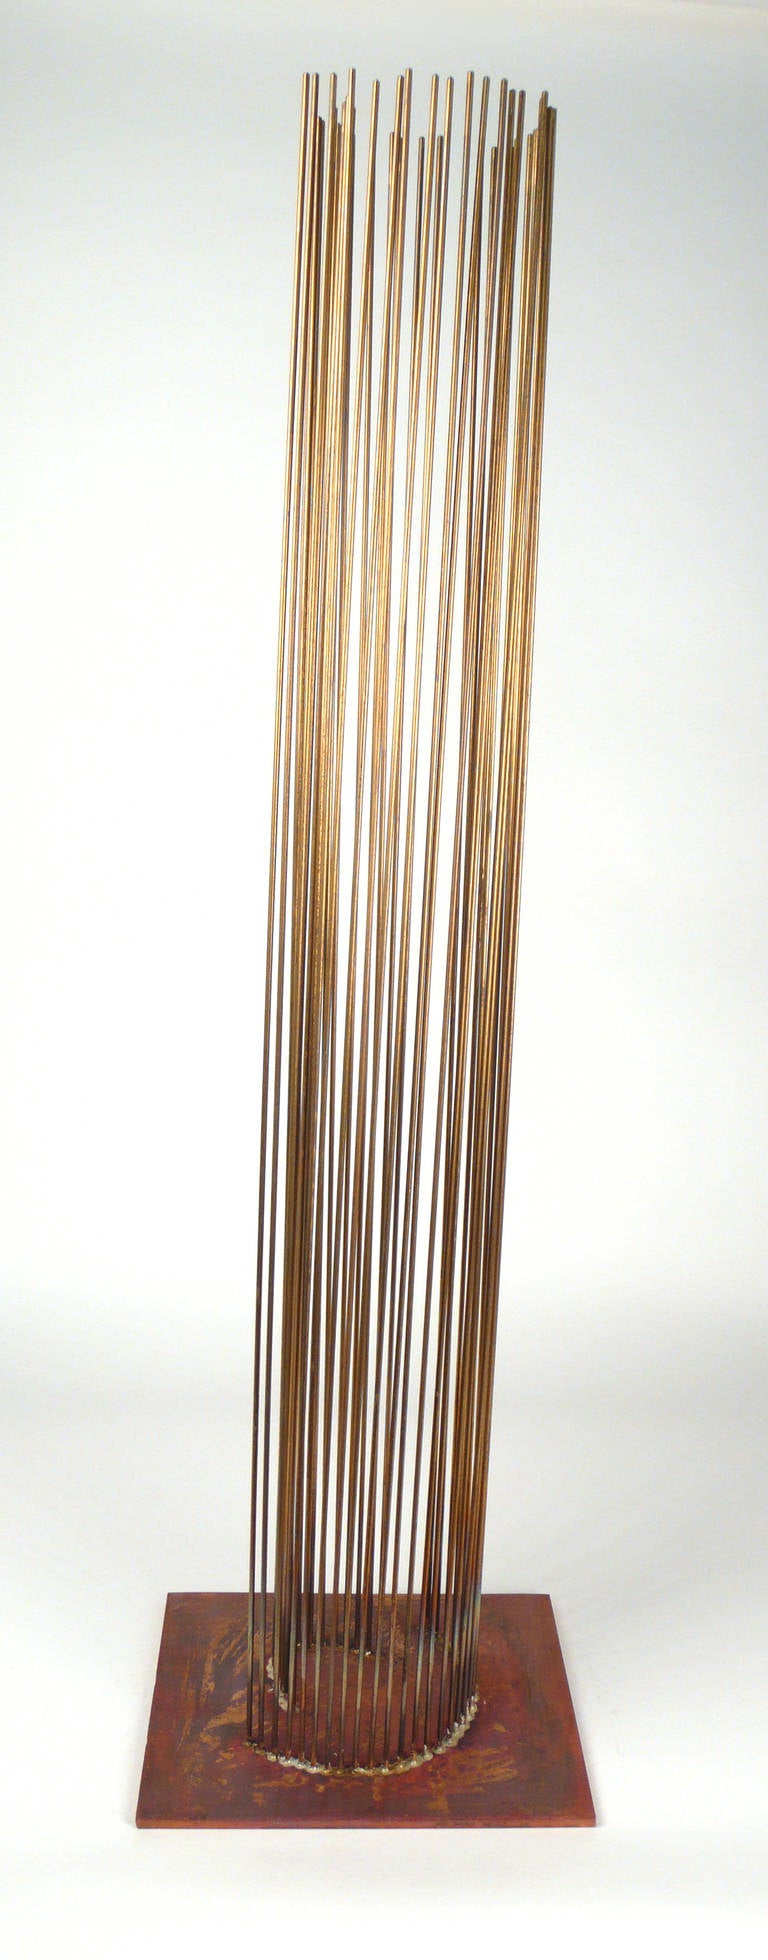 American Val Bertoia's Copper Rods, Openning Sounds